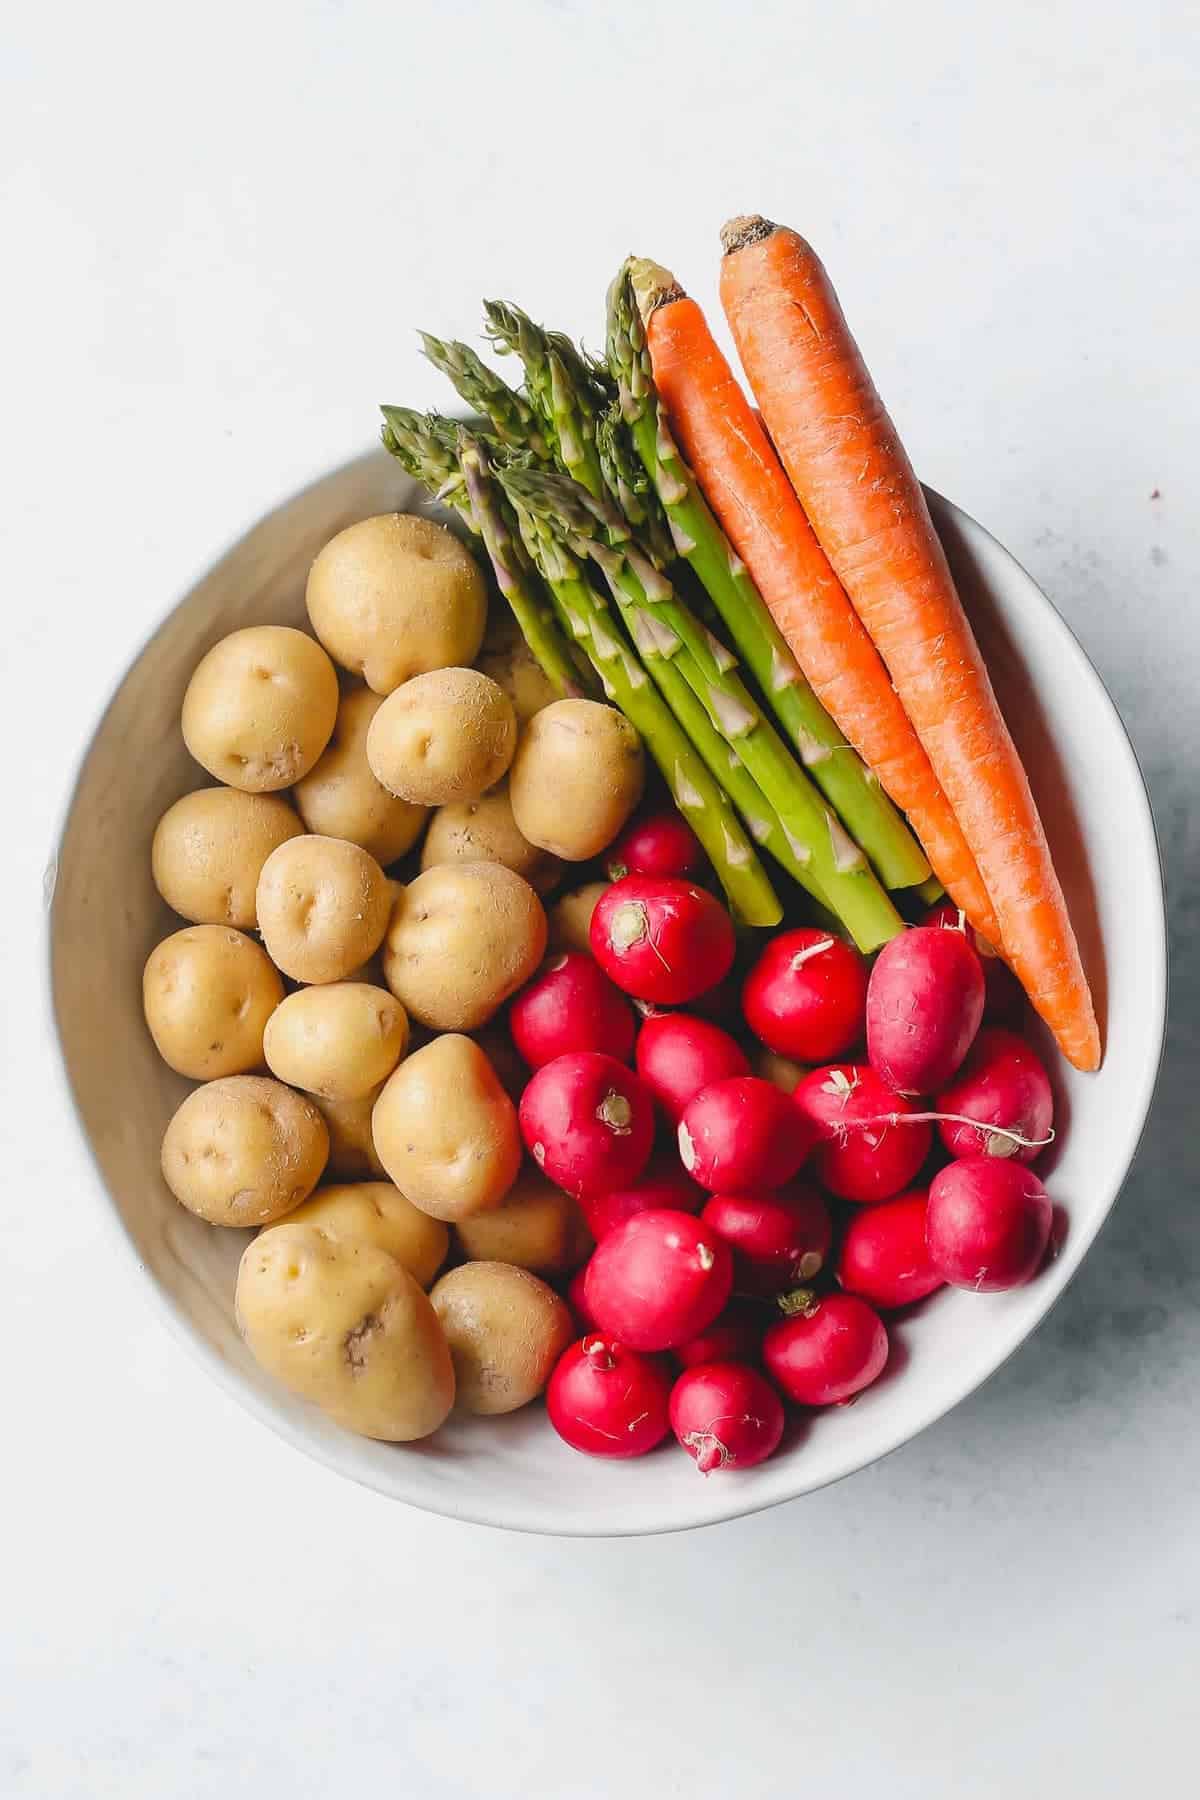 Potatoes, radishes, carrots and asparagus in a bowl